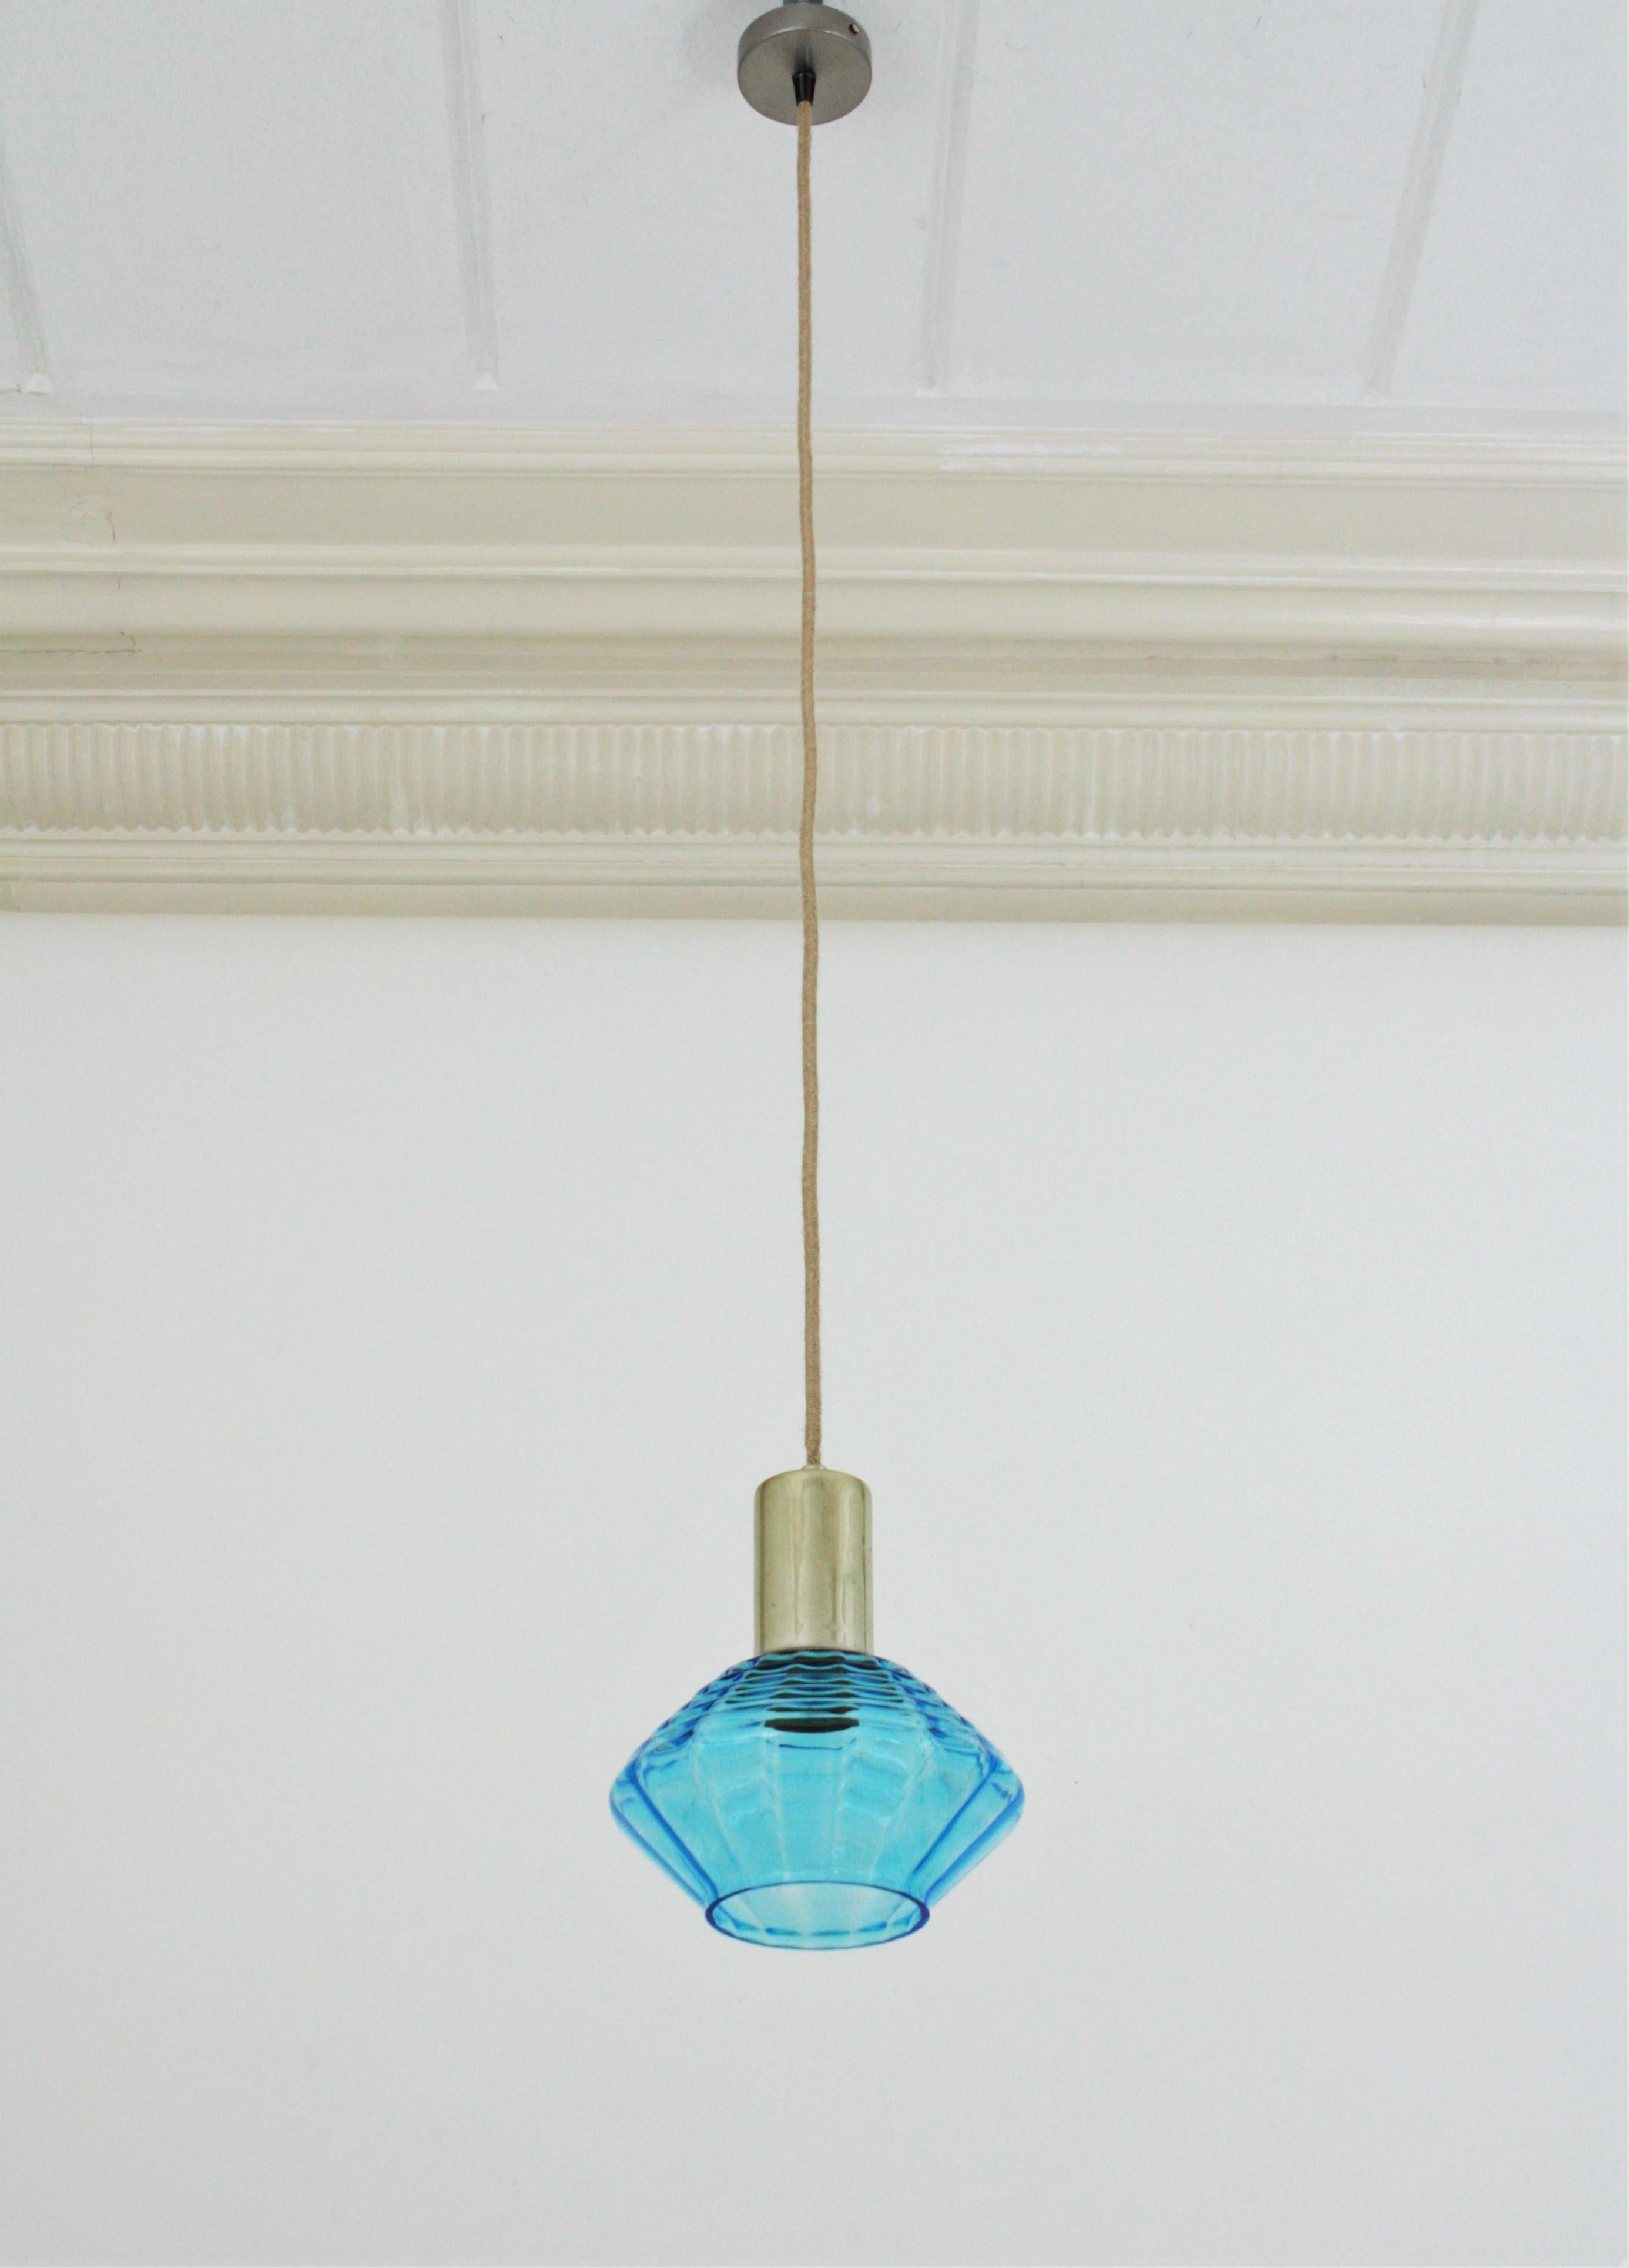 Eye-catching suspension light with blown glass blue shade and chromed steel accents, Italy, 1960s.
This suspension features an undulated hand blown glass shade hanging from a cloth covered wire. It has details in chromed steel.
A beautiful